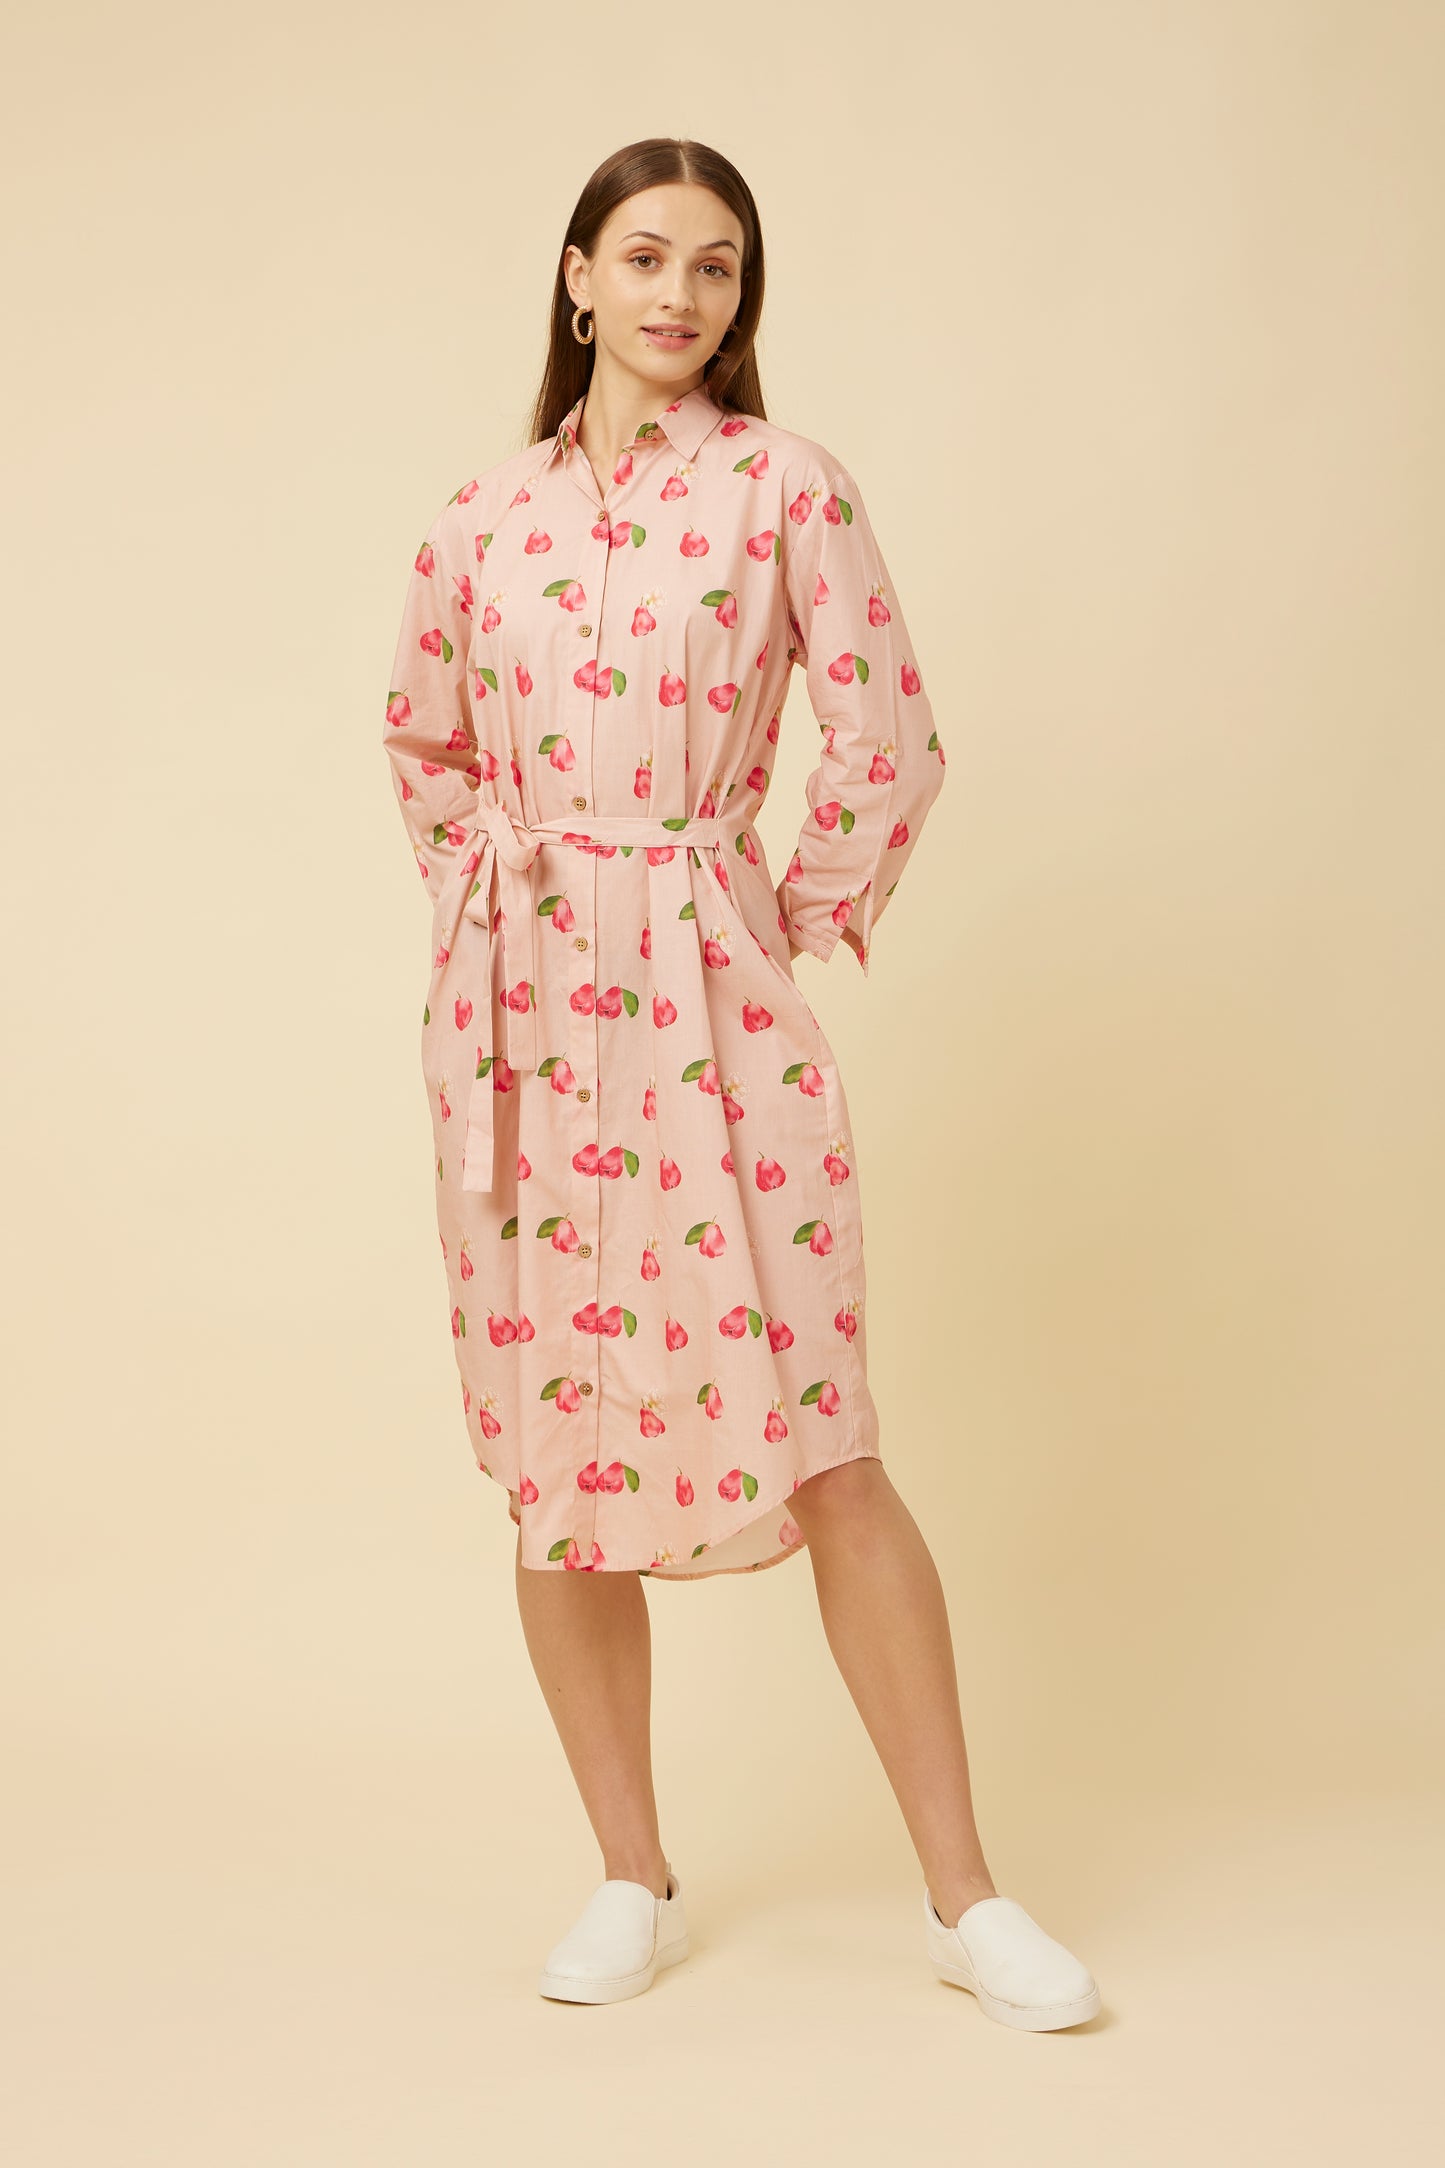 Elegant Rose Apple Print shirt dress with 3/4 sleeves and waist tie, offering a chic and comfortable fit